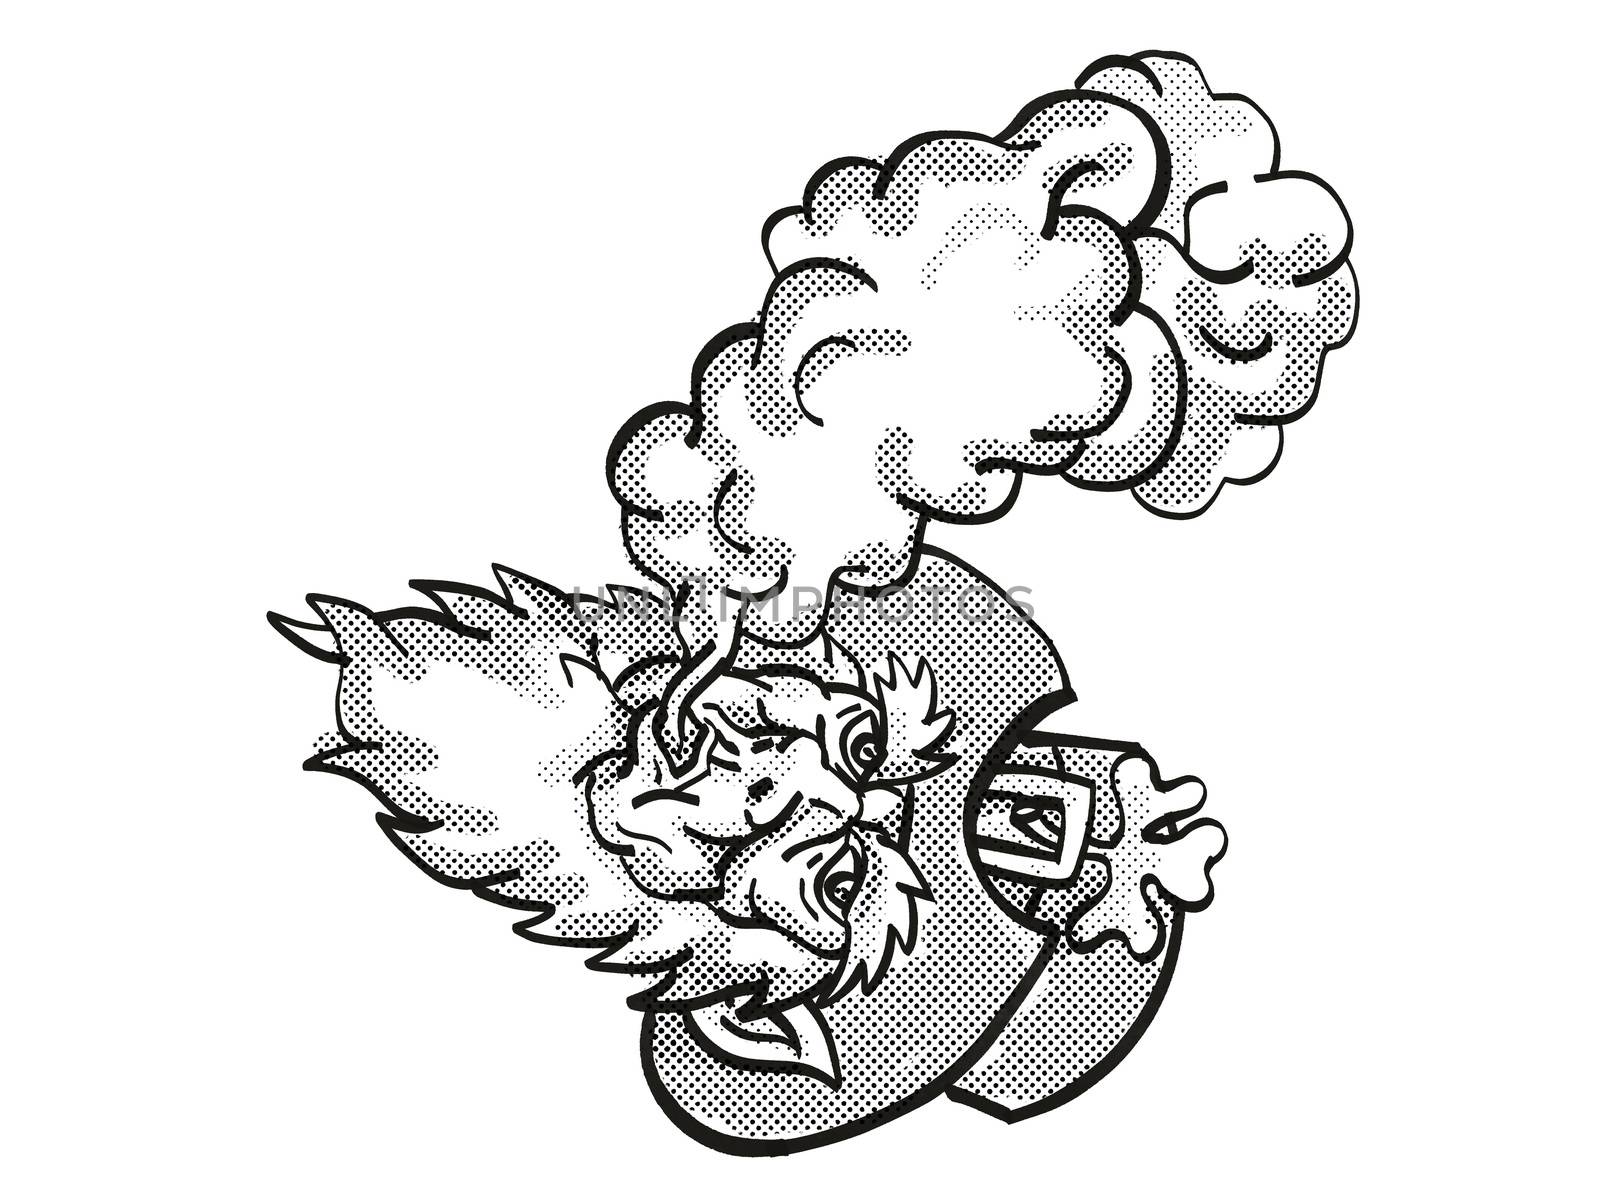 Tattoo cartoon style drawing illustration of an Irish Leprechaun Vaping puffing smoke on isolated background done in black and white.